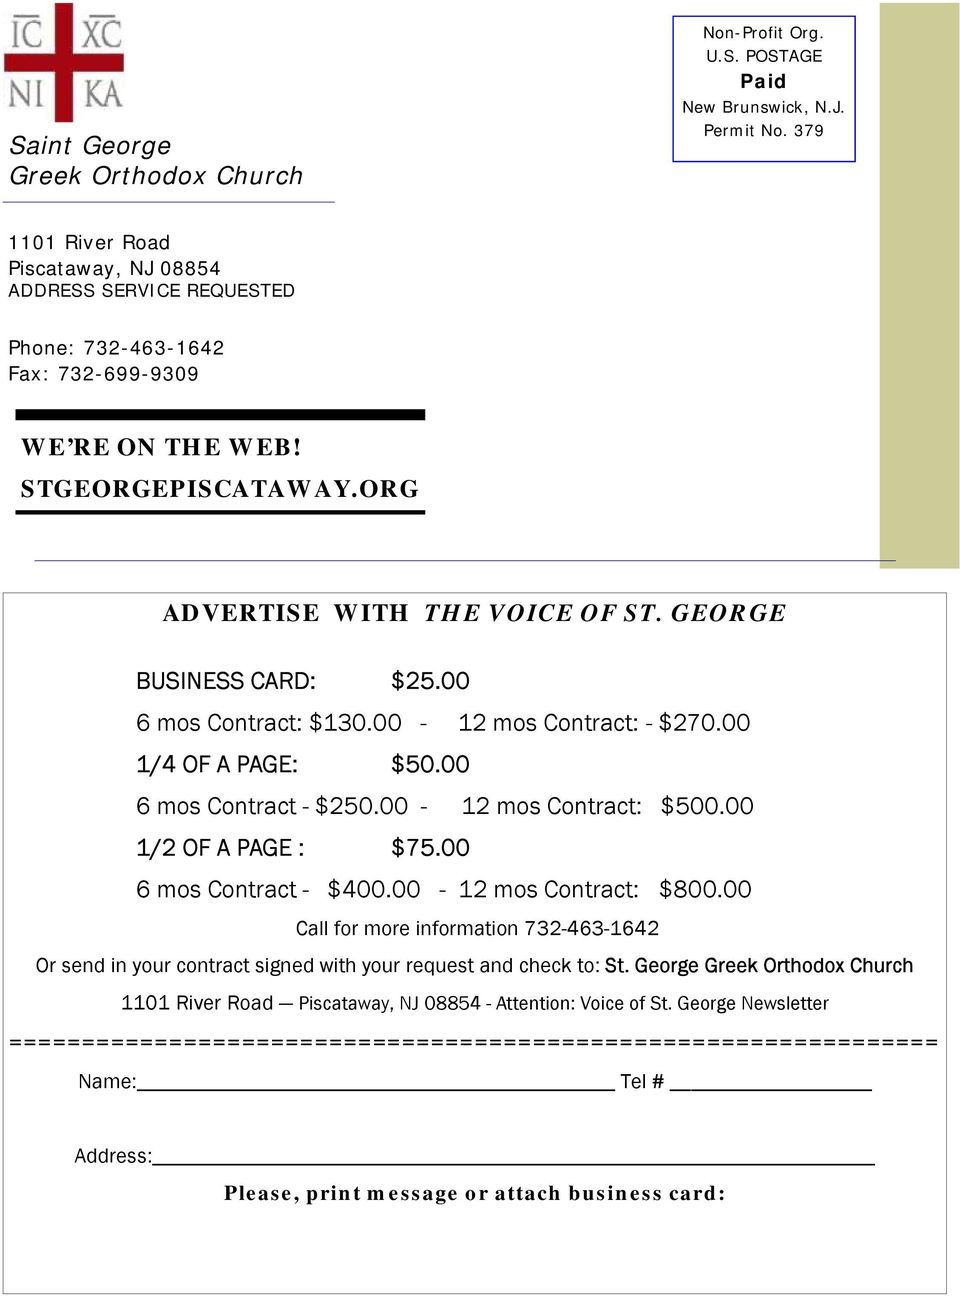 GEORGE BUSINESS CARD: $25.00 6 mos Contract: $130.00-12 mos Contract: - $270.00 1/4 OF A PAGE: $50.00 6 mos Contract - $250.00-12 mos Contract: $500.00 1/2 OF A PAGE : $75.00 6 mos Contract - $400.